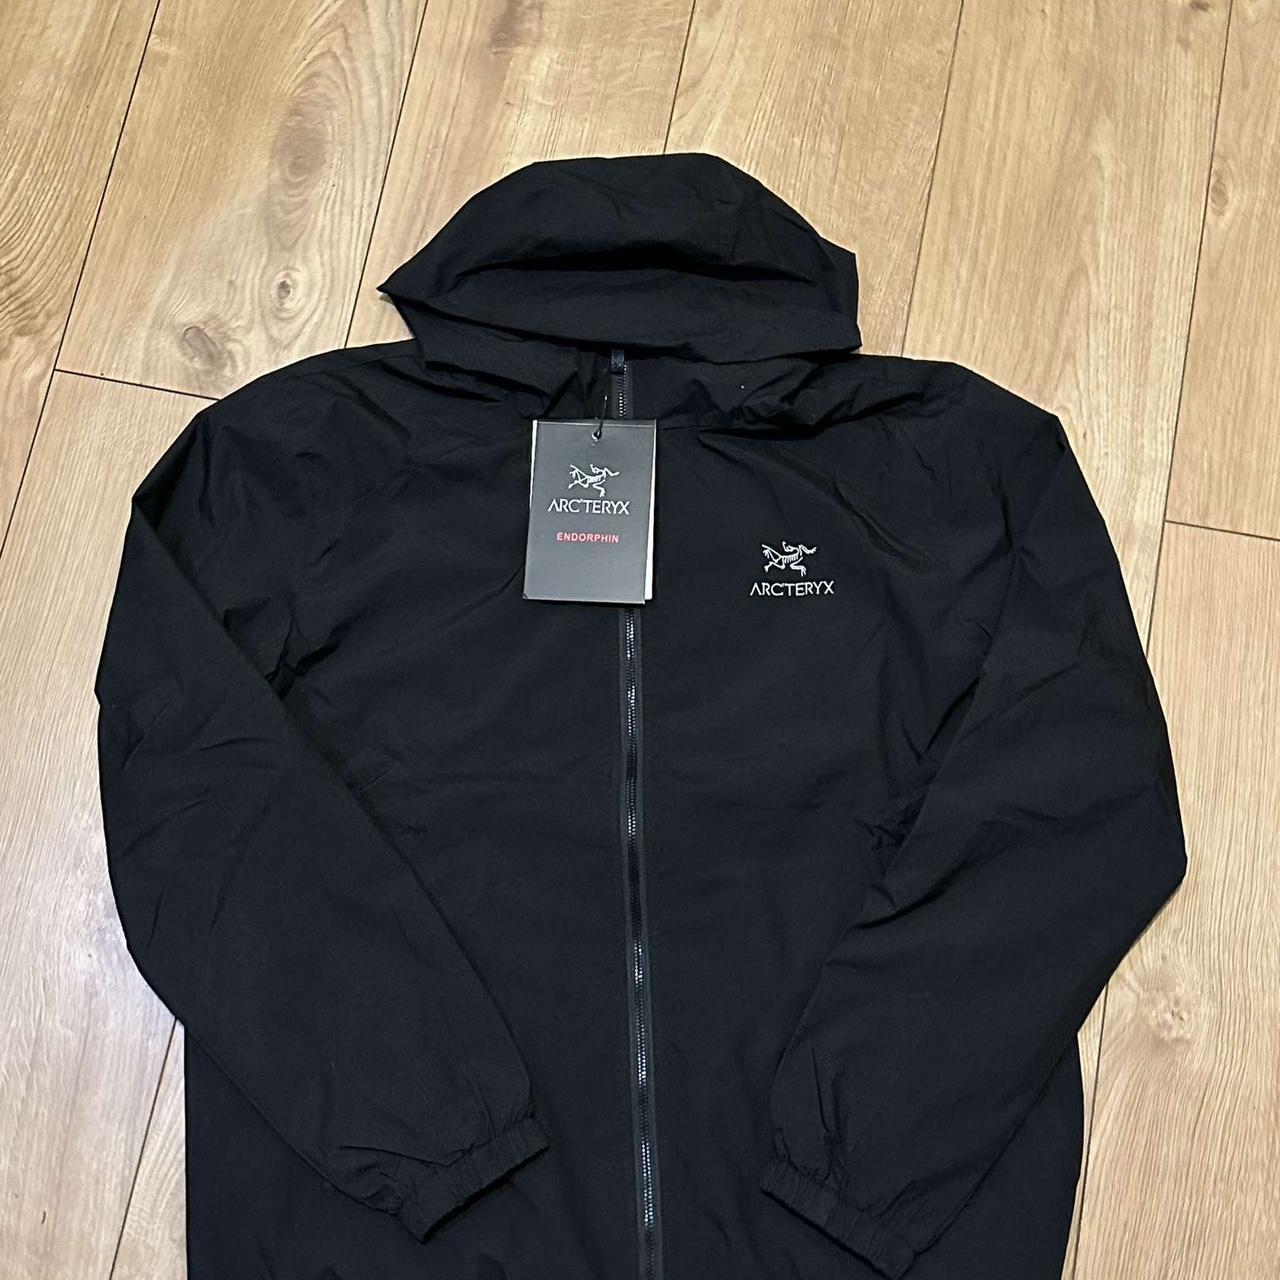 Arc’teryx Windbreaker jacket Brand new with tags and... - Depop